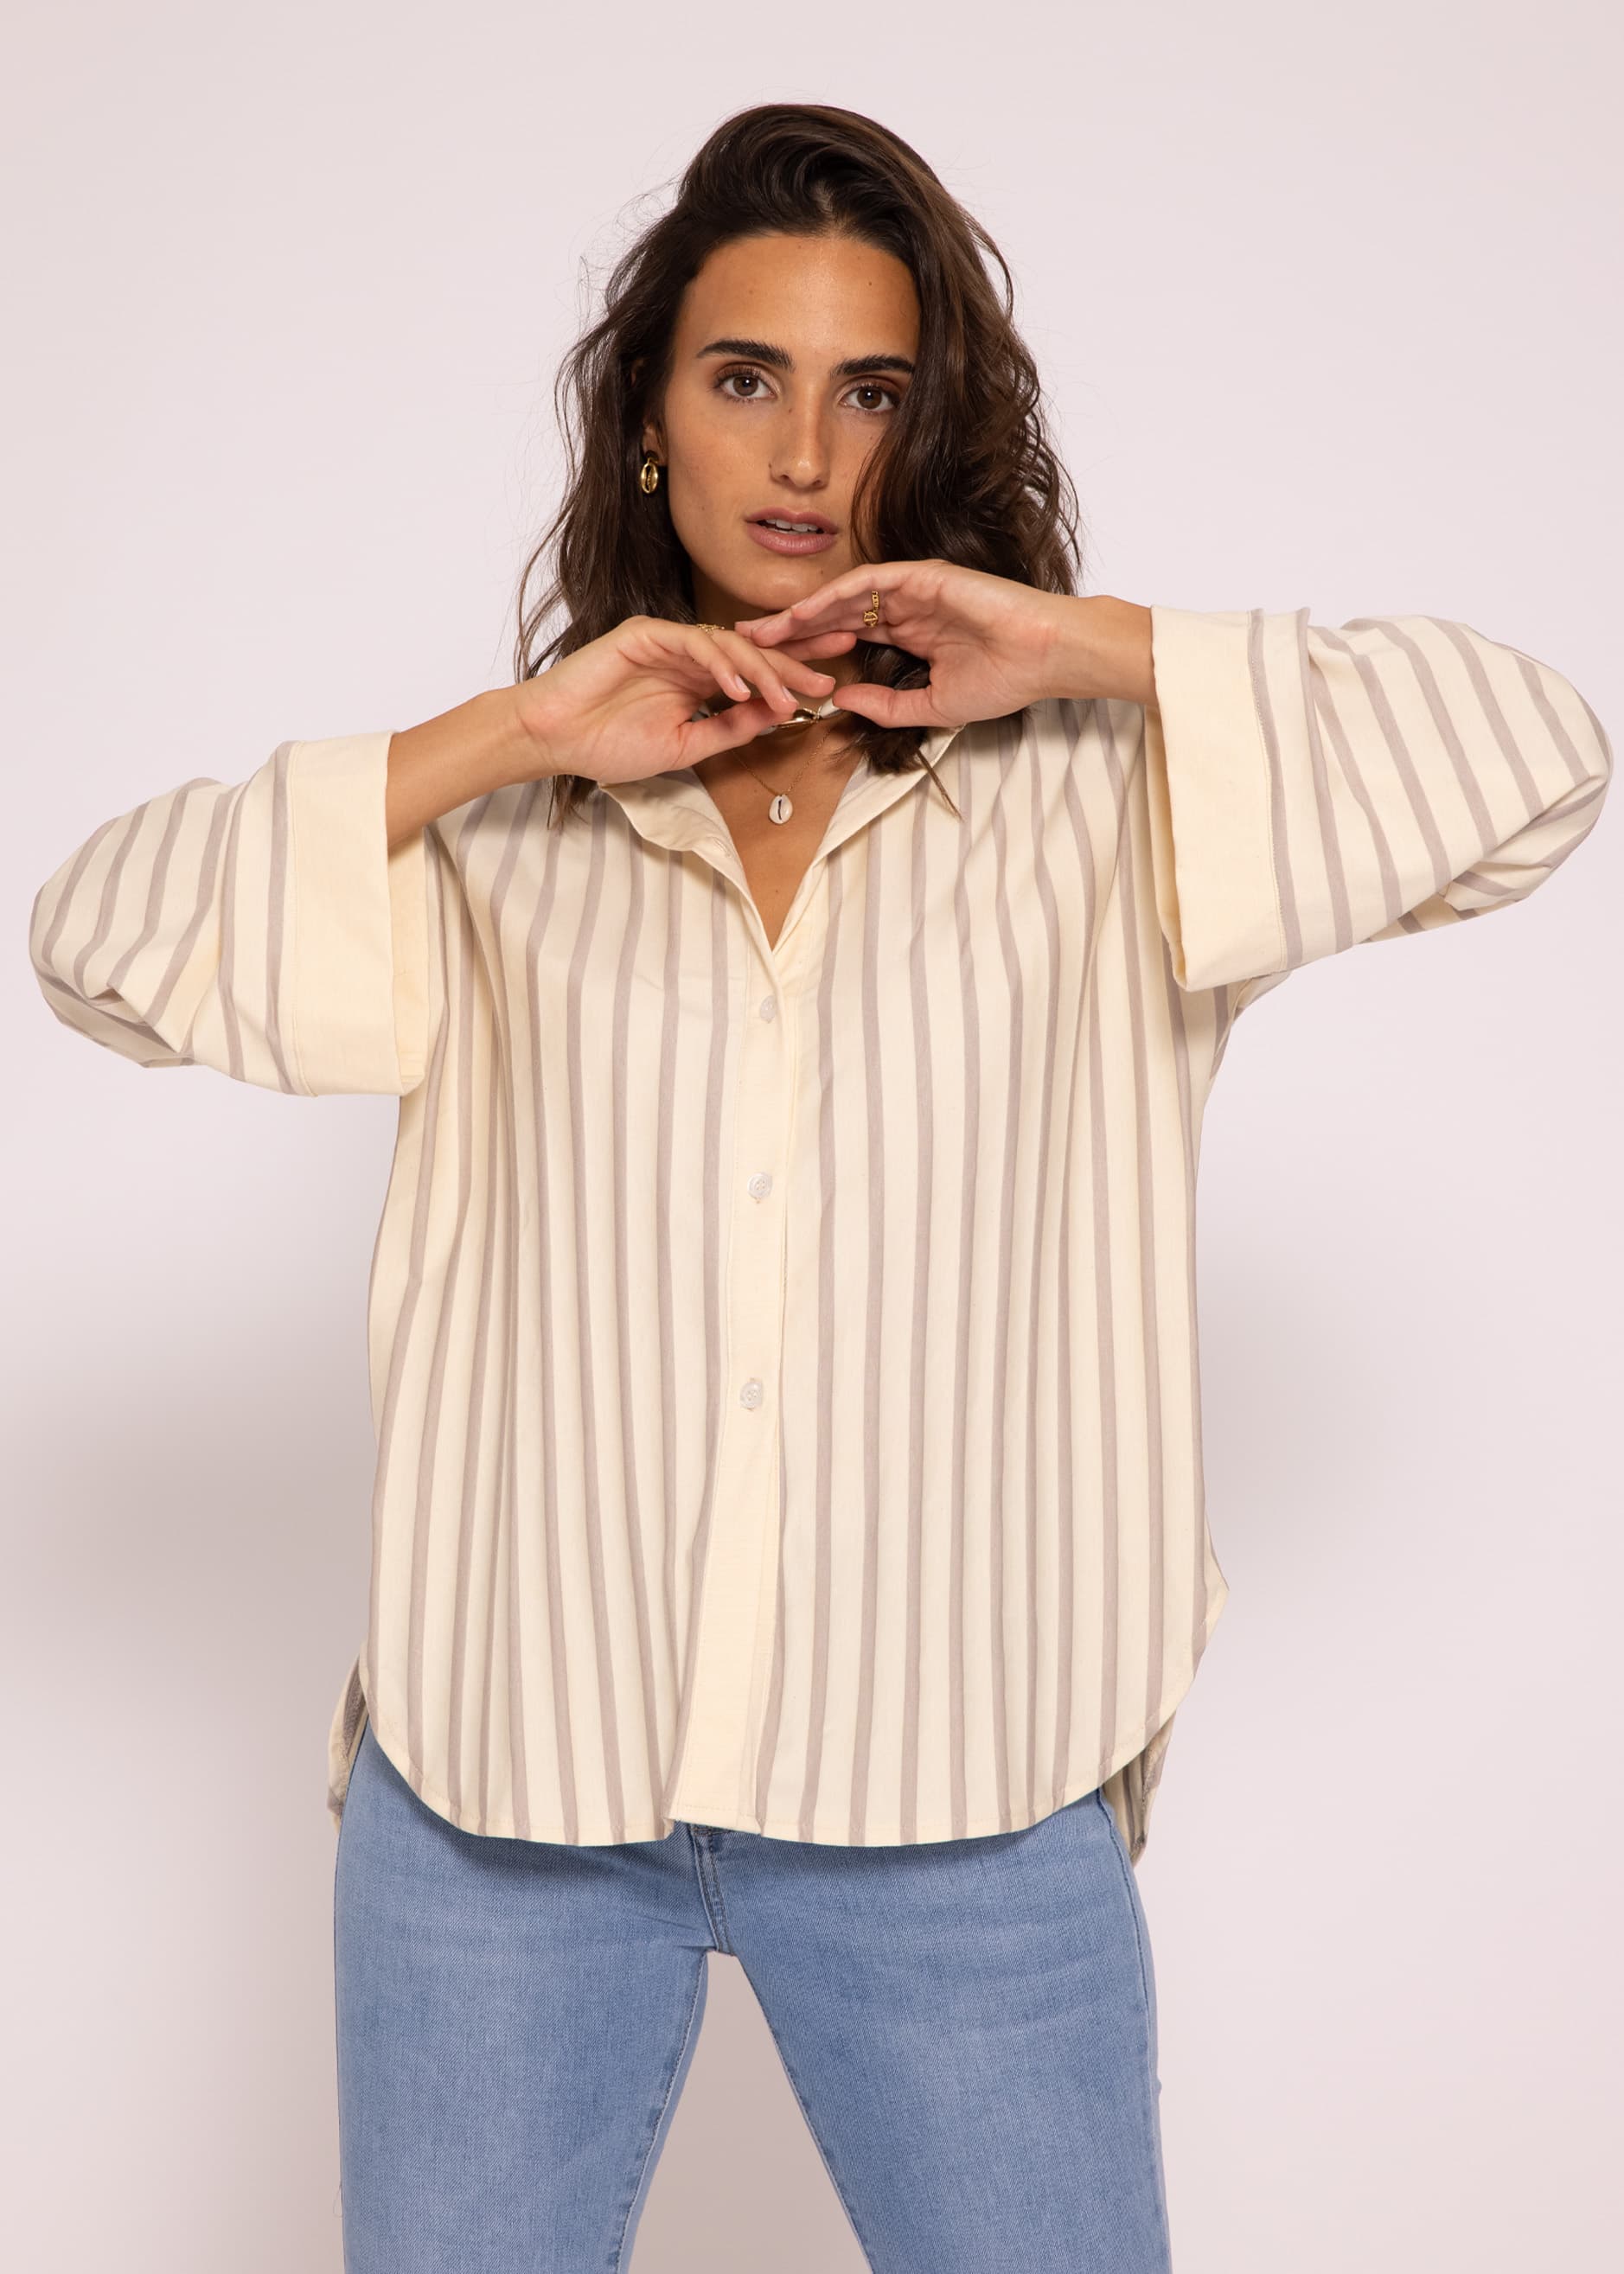 Discriminerend Tante Product Jersey kimono blouse with stripes, beige/taupe | New Clothing | New  Arrivals | SassyClassy.com